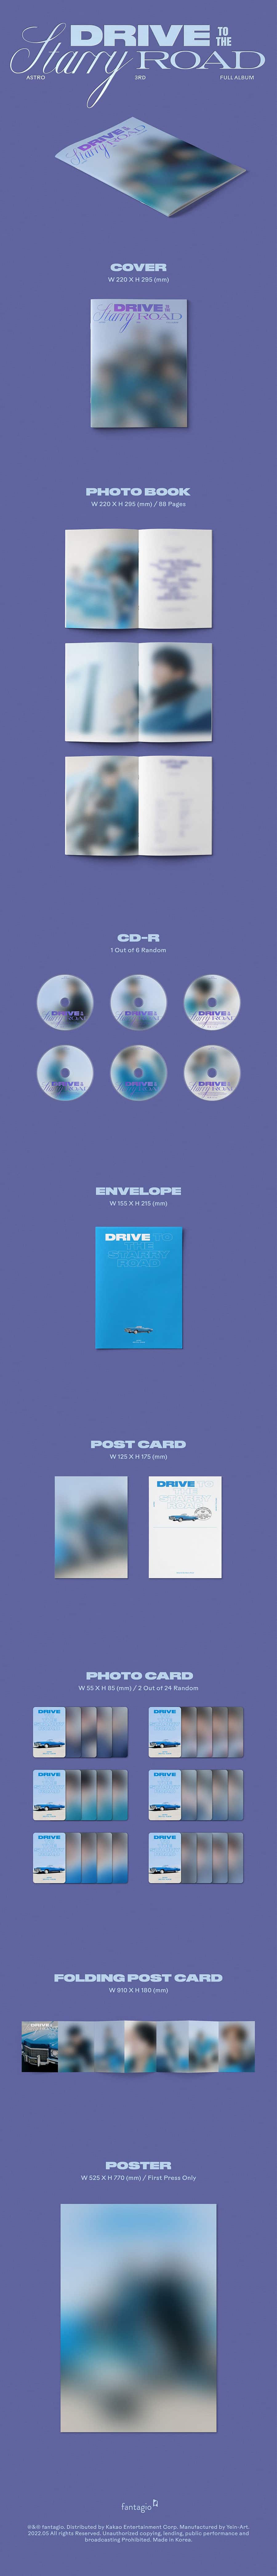 astro-3rd-full-album-drive-to-the-starry-road